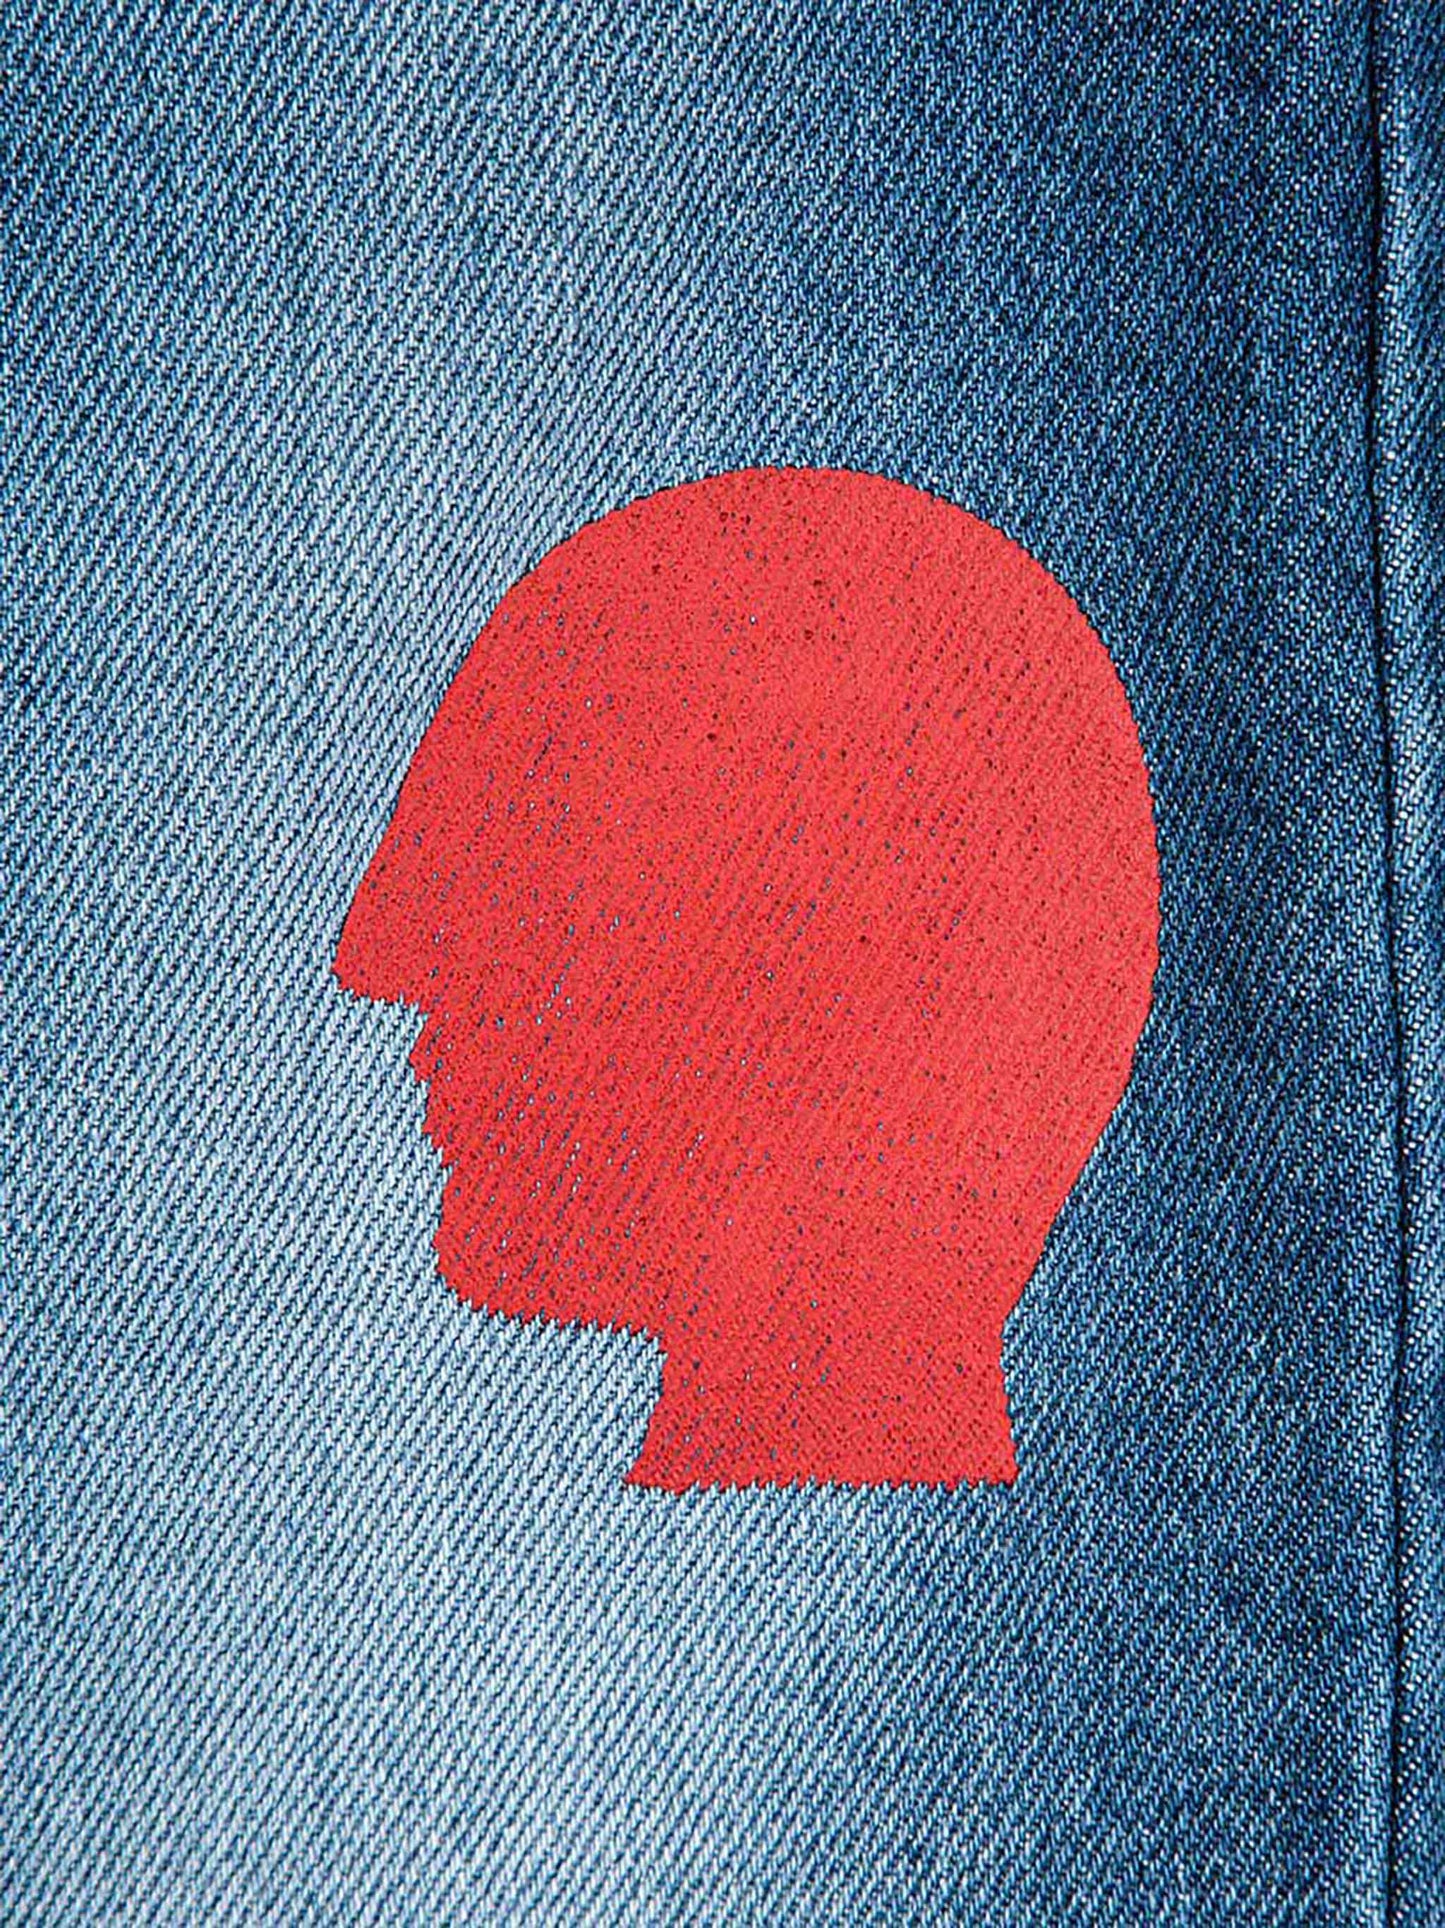 Faces flared denim trousers